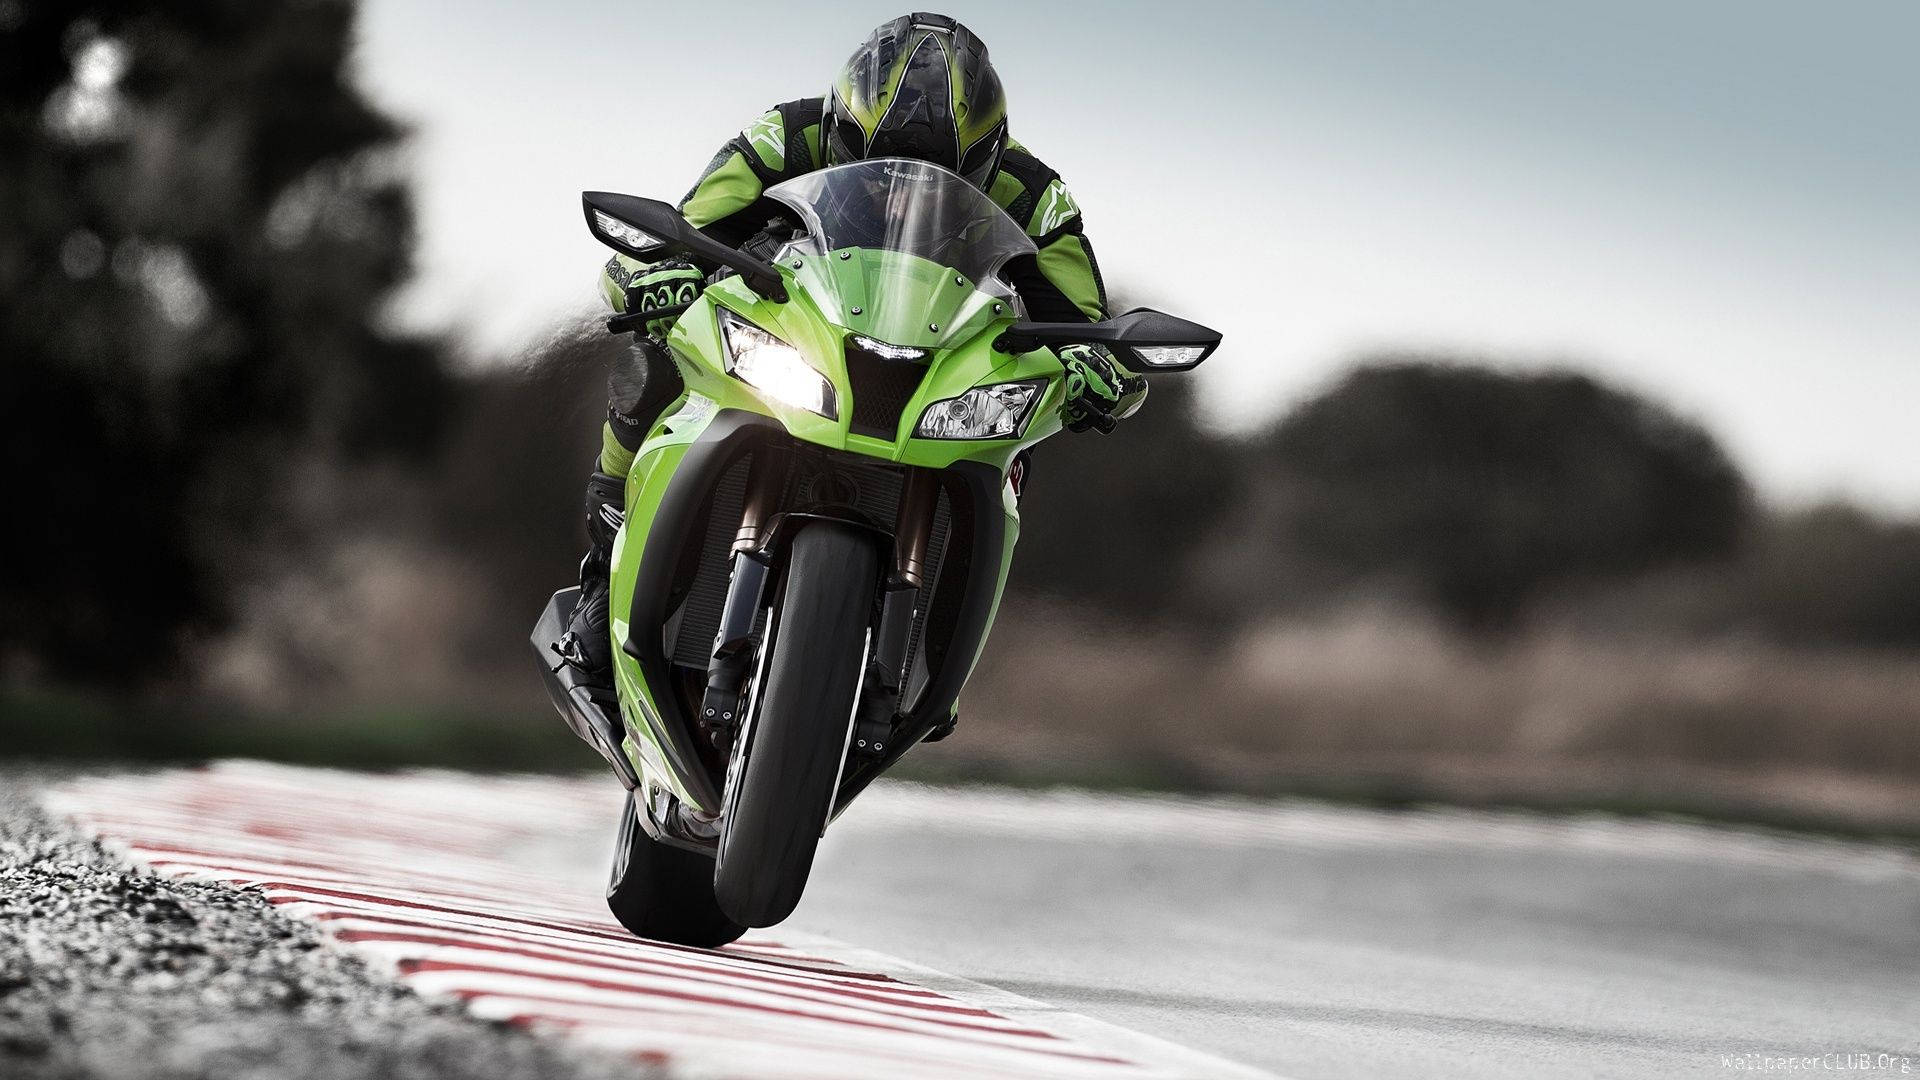 Ready, Set, Go! Get This Racing Green Kawasaki Ninja And Take It For A Spin. Background